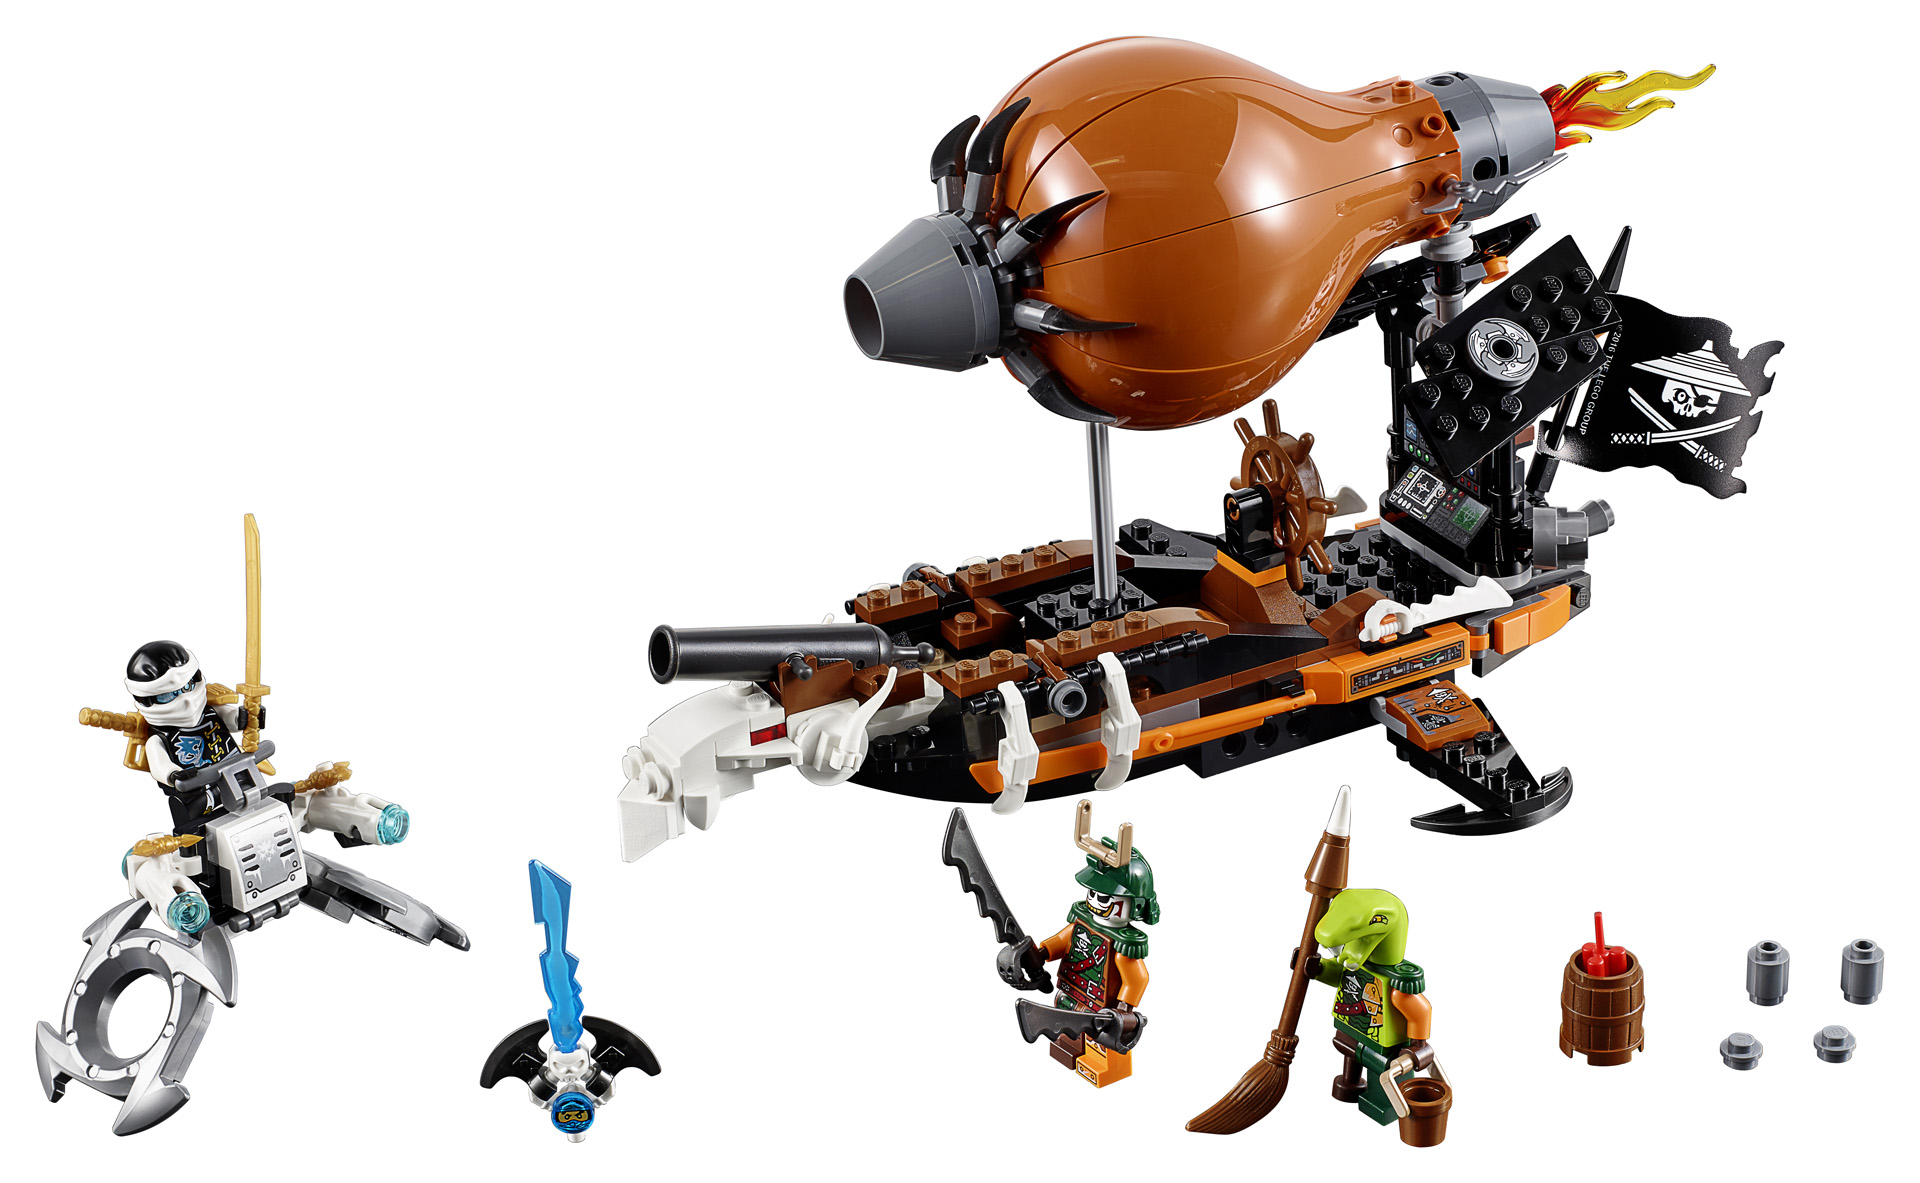 LEGO Ninjago Takes To The Skies With 7 New Sets